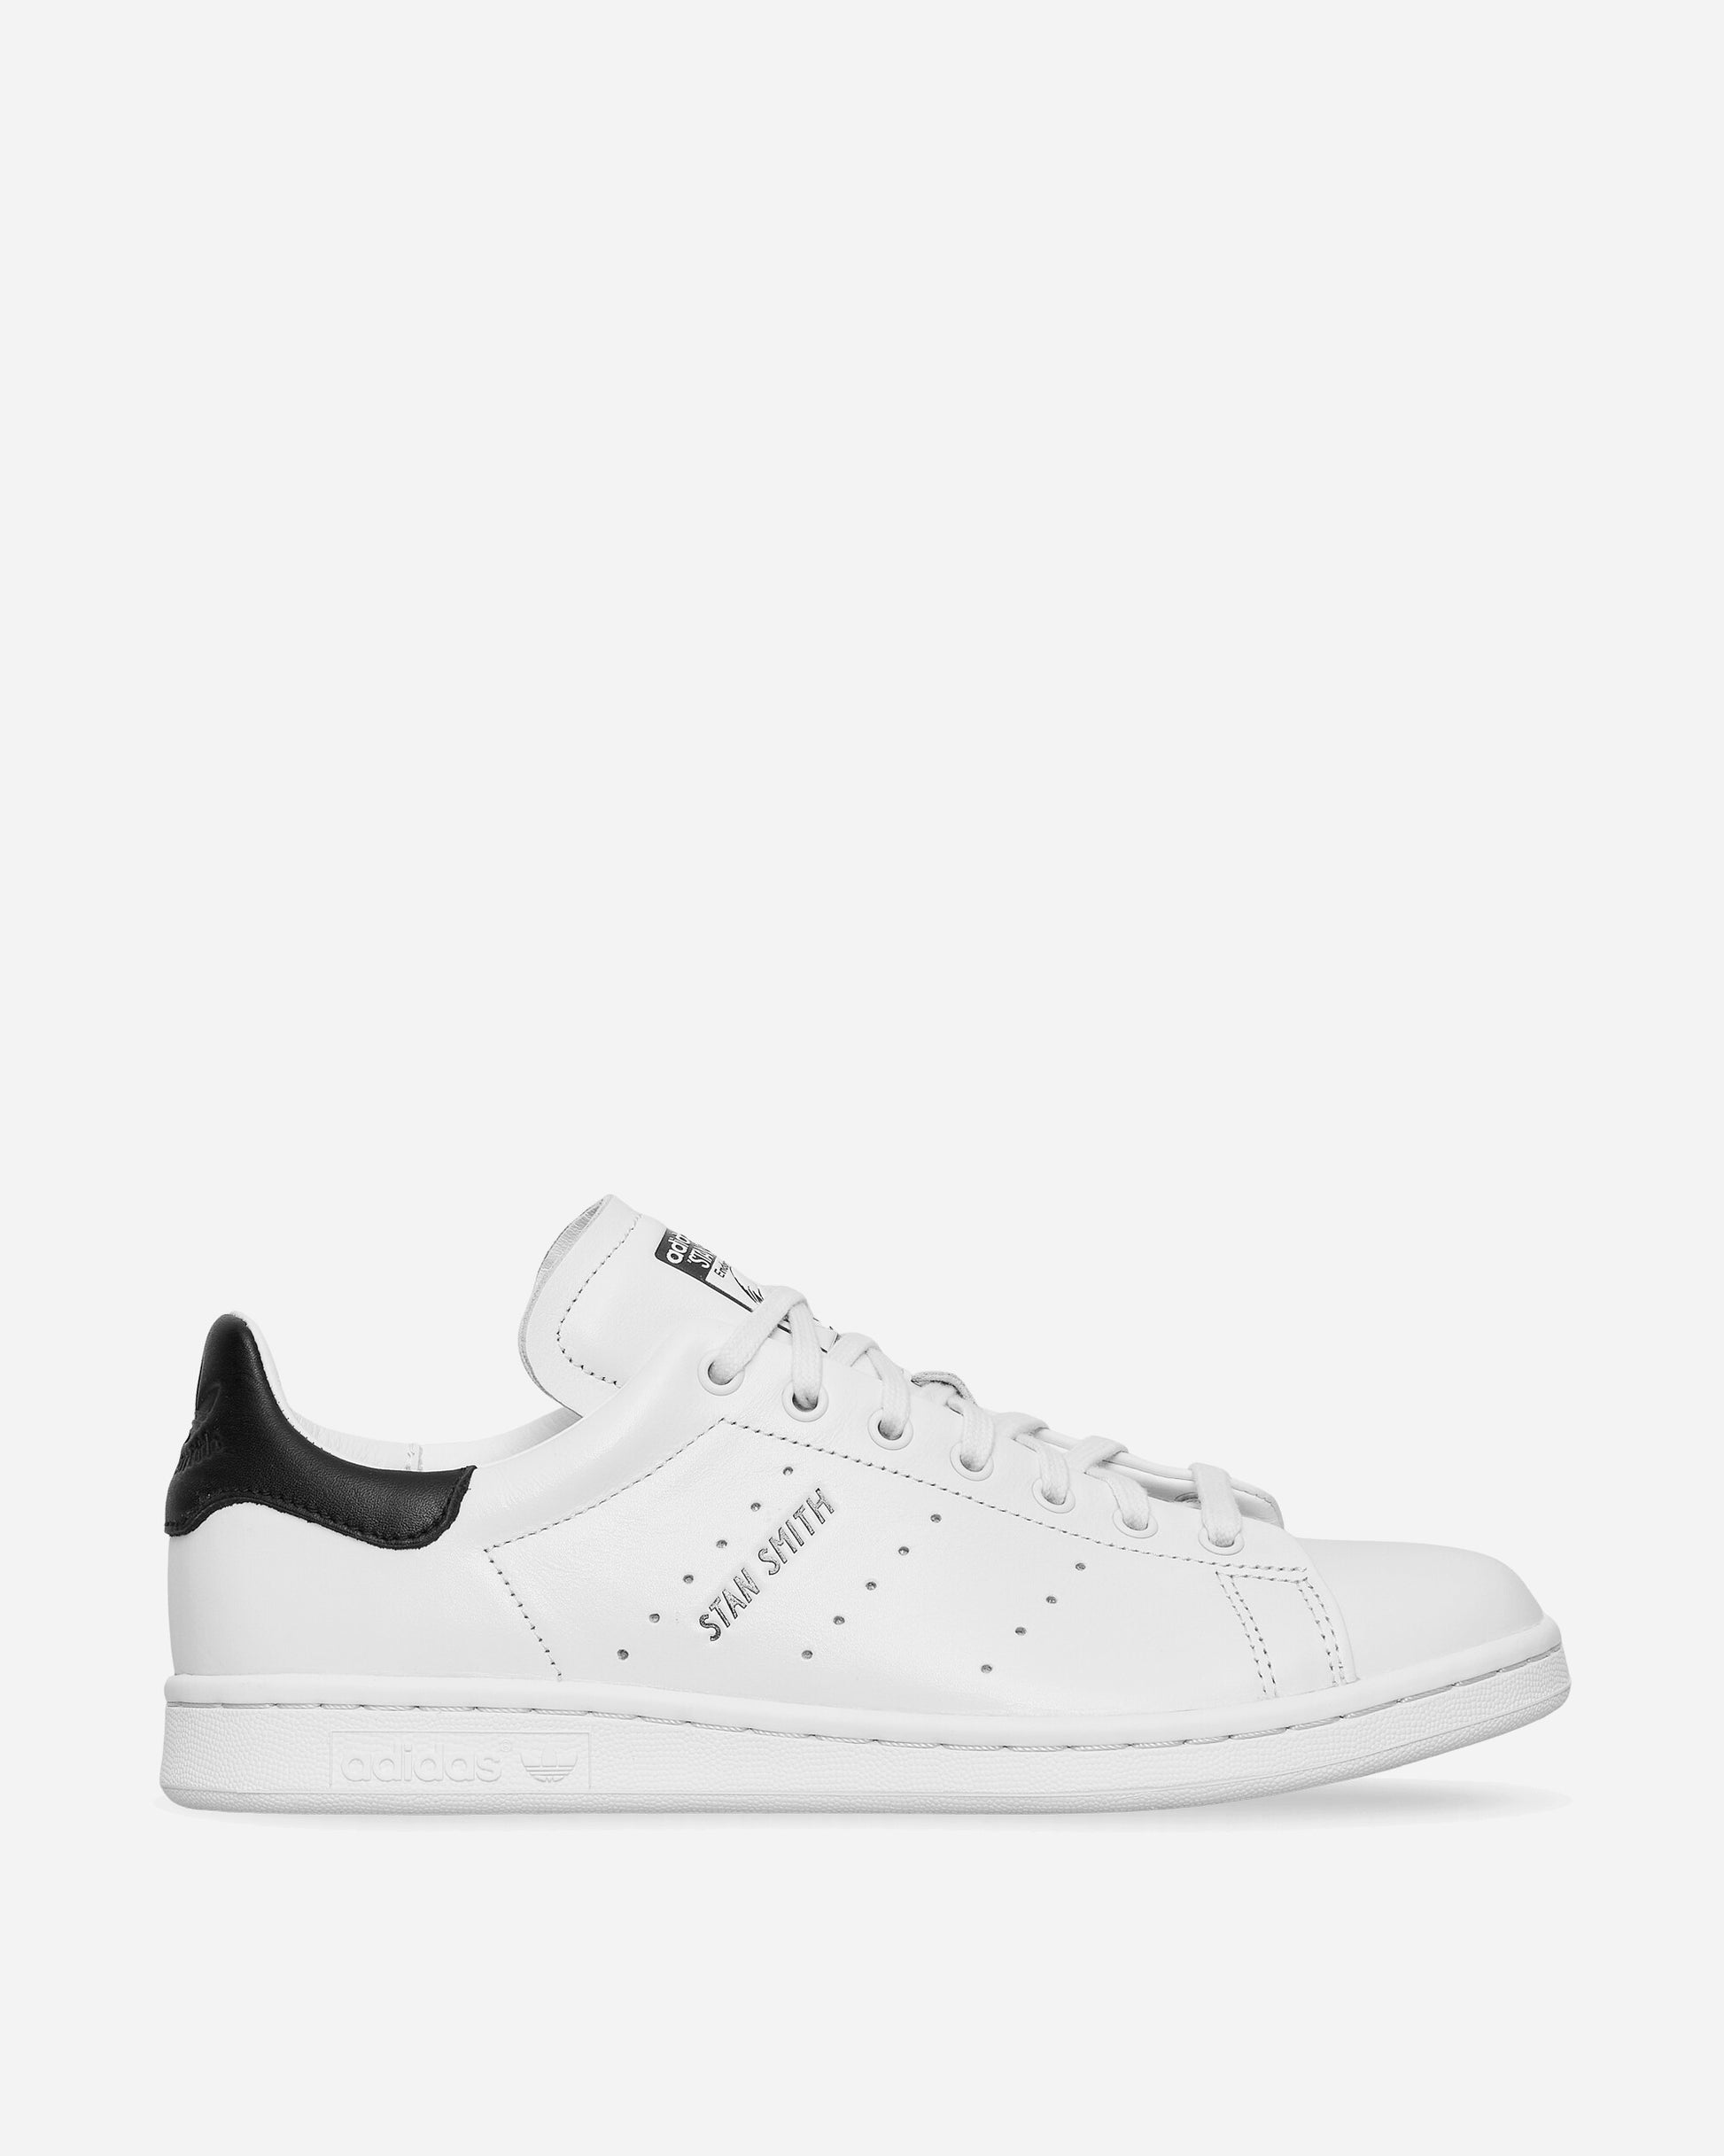 adidas Stan Smith Lux White Sneakers Low HQ6785 001